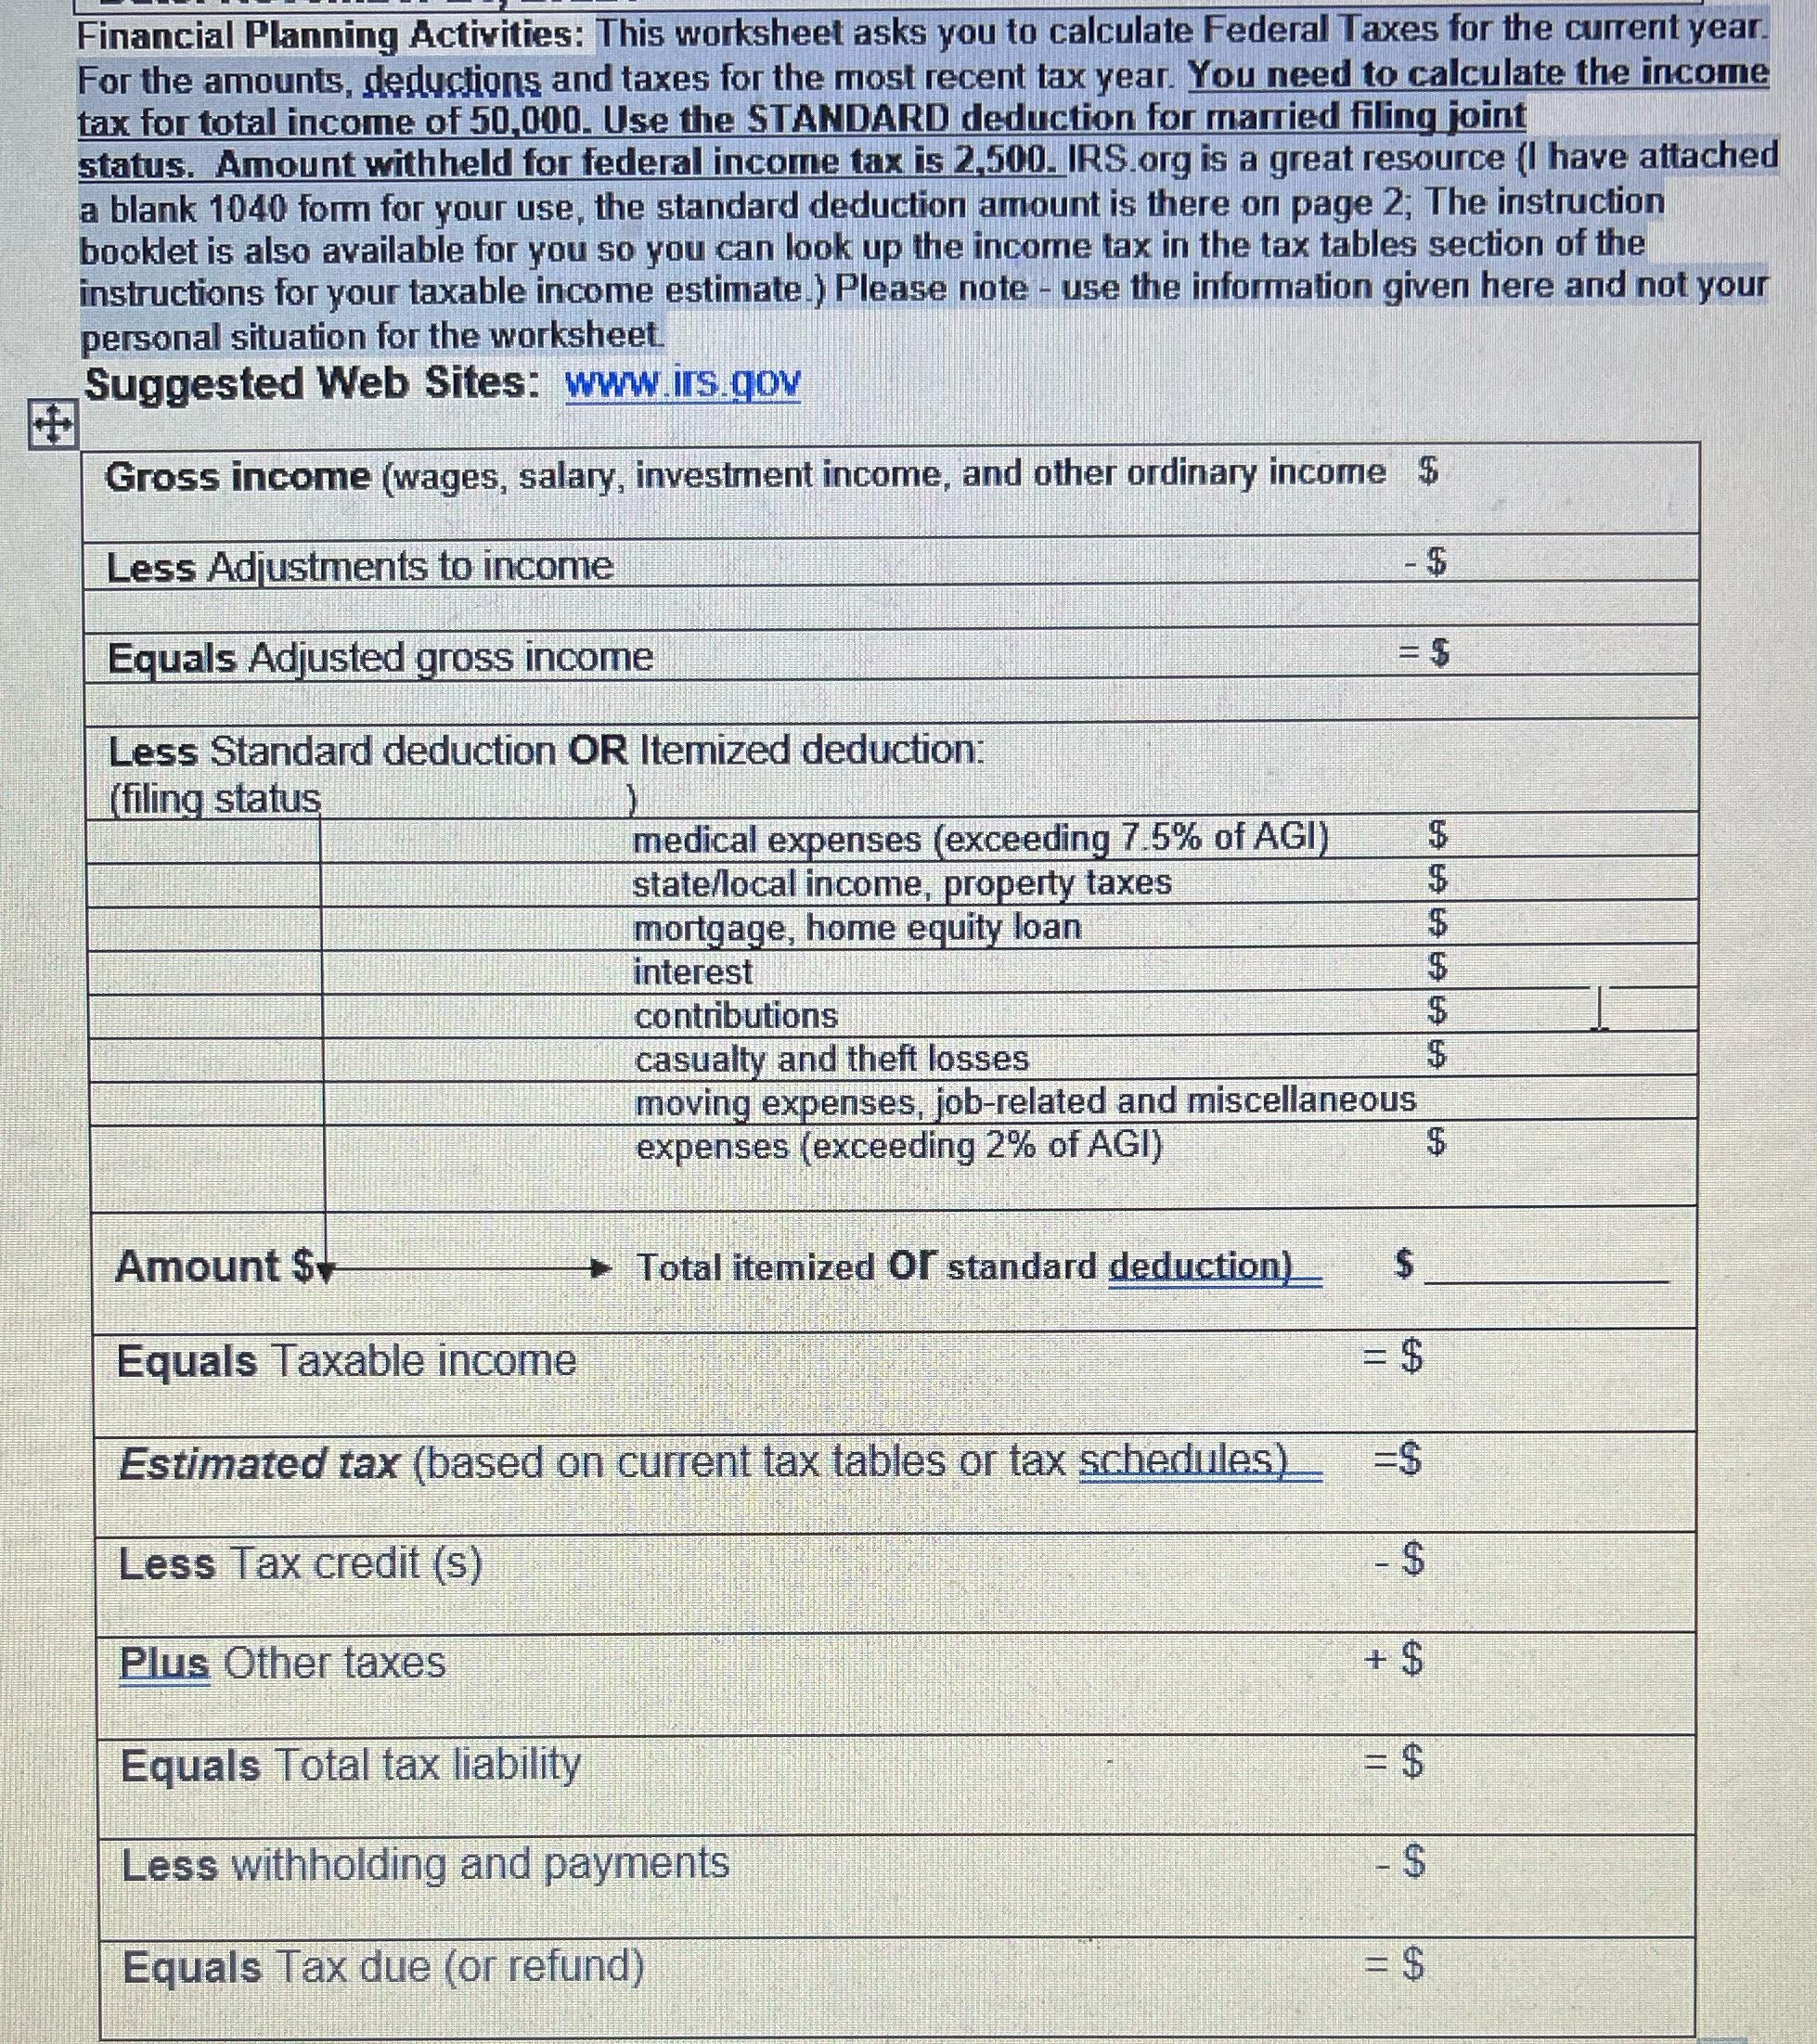 Financial Planning Activities: This worksheet asks you to calculate Federal Taxes for the current year. For